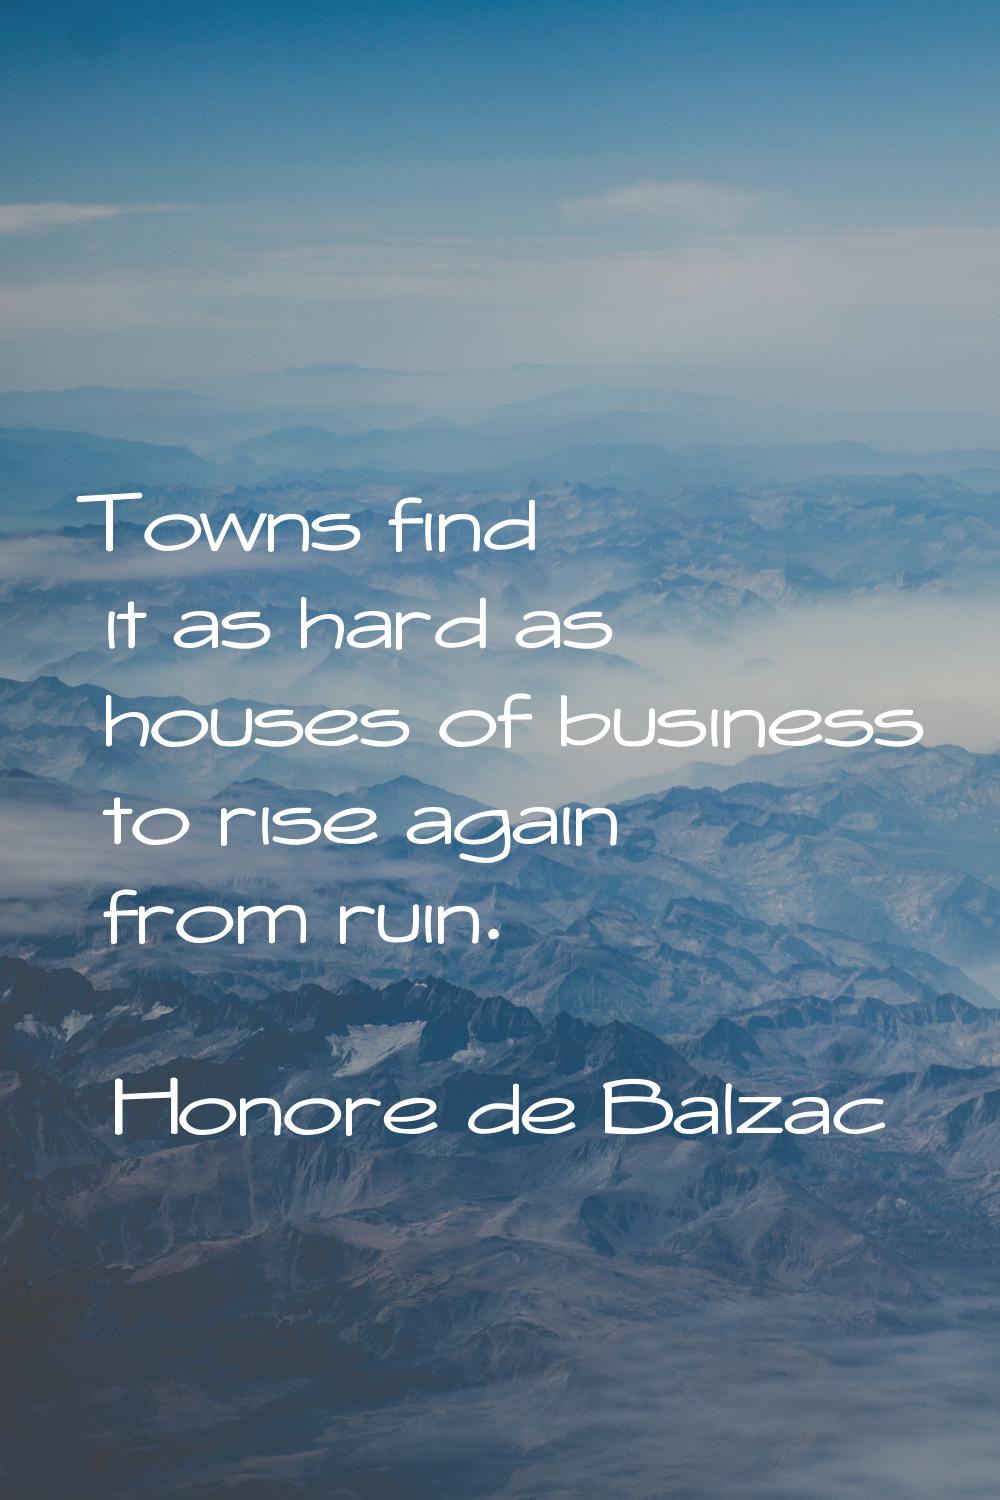 Towns find it as hard as houses of business to rise again from ruin.